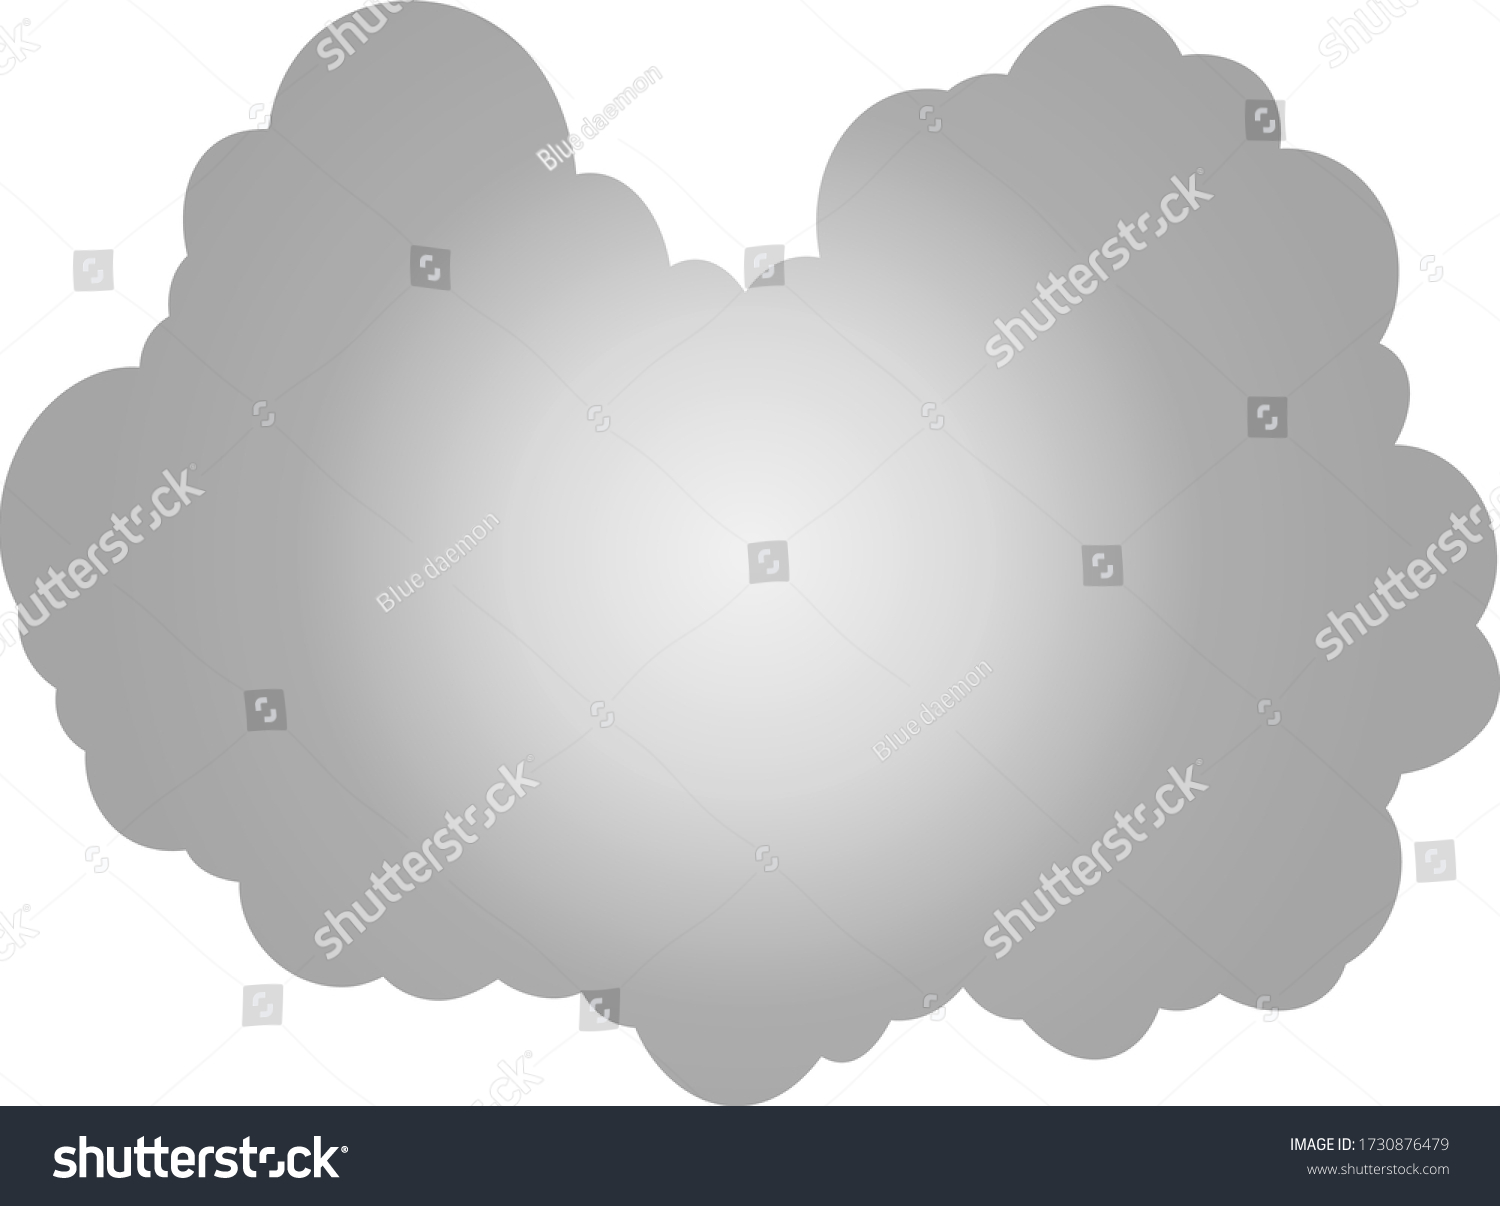 This Illustration Japanese Clouds Stock Vector (Royalty Free ...